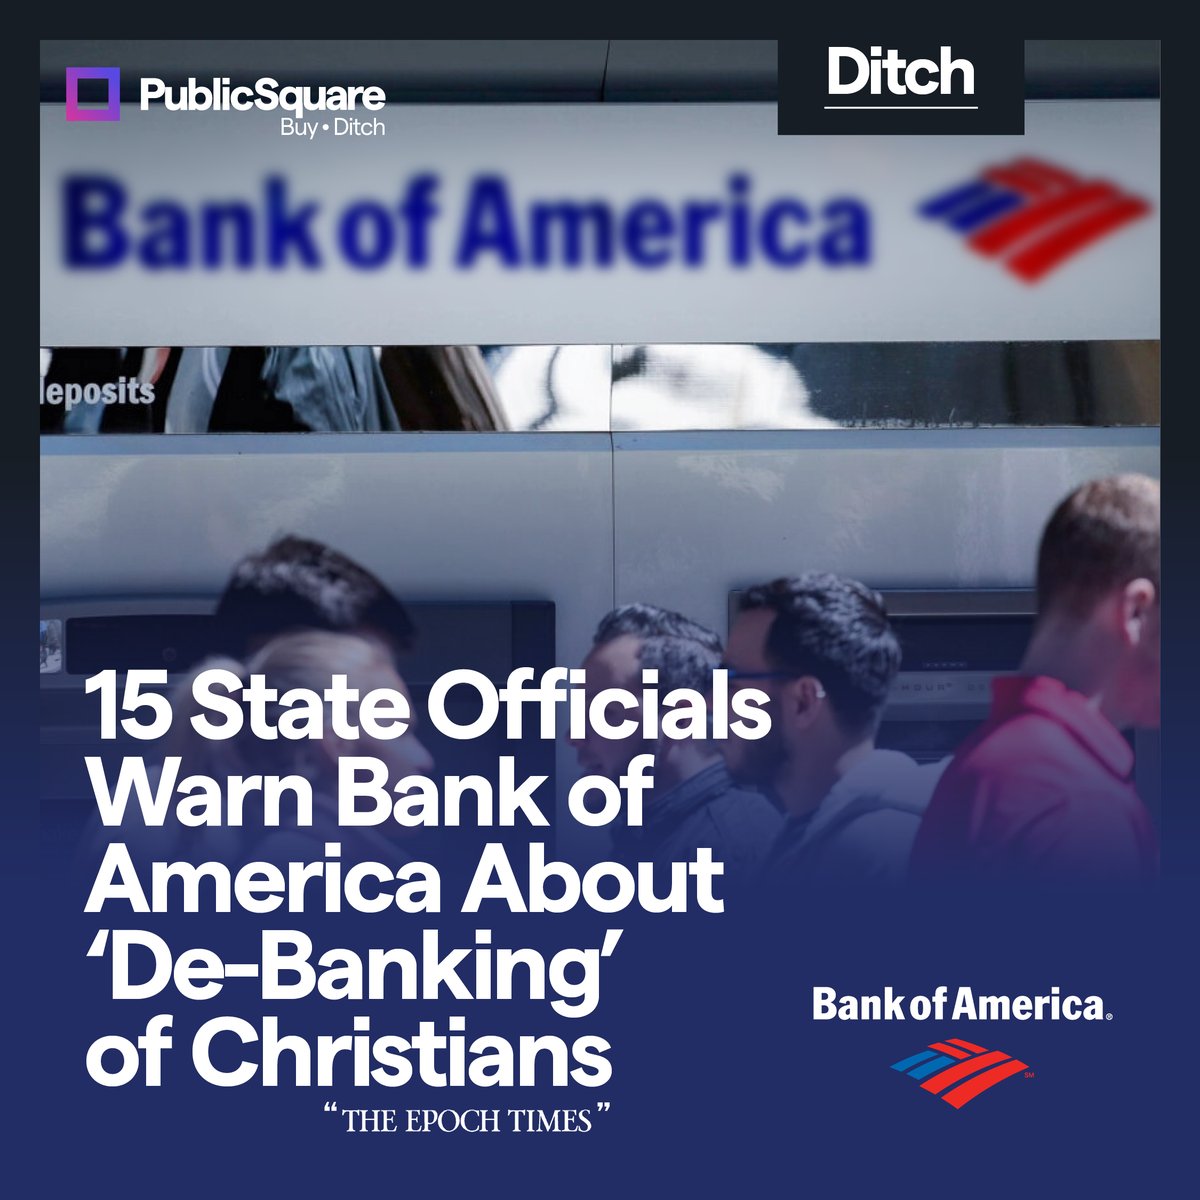 Banks being able to shut the accounts of their moral enemies should scare you. The Parallel Economy must create non-woke solutions in every aspect of society, including such a fundamental piece of a healthy economy, the banks! We MUST vote with our dollar, shop our values,